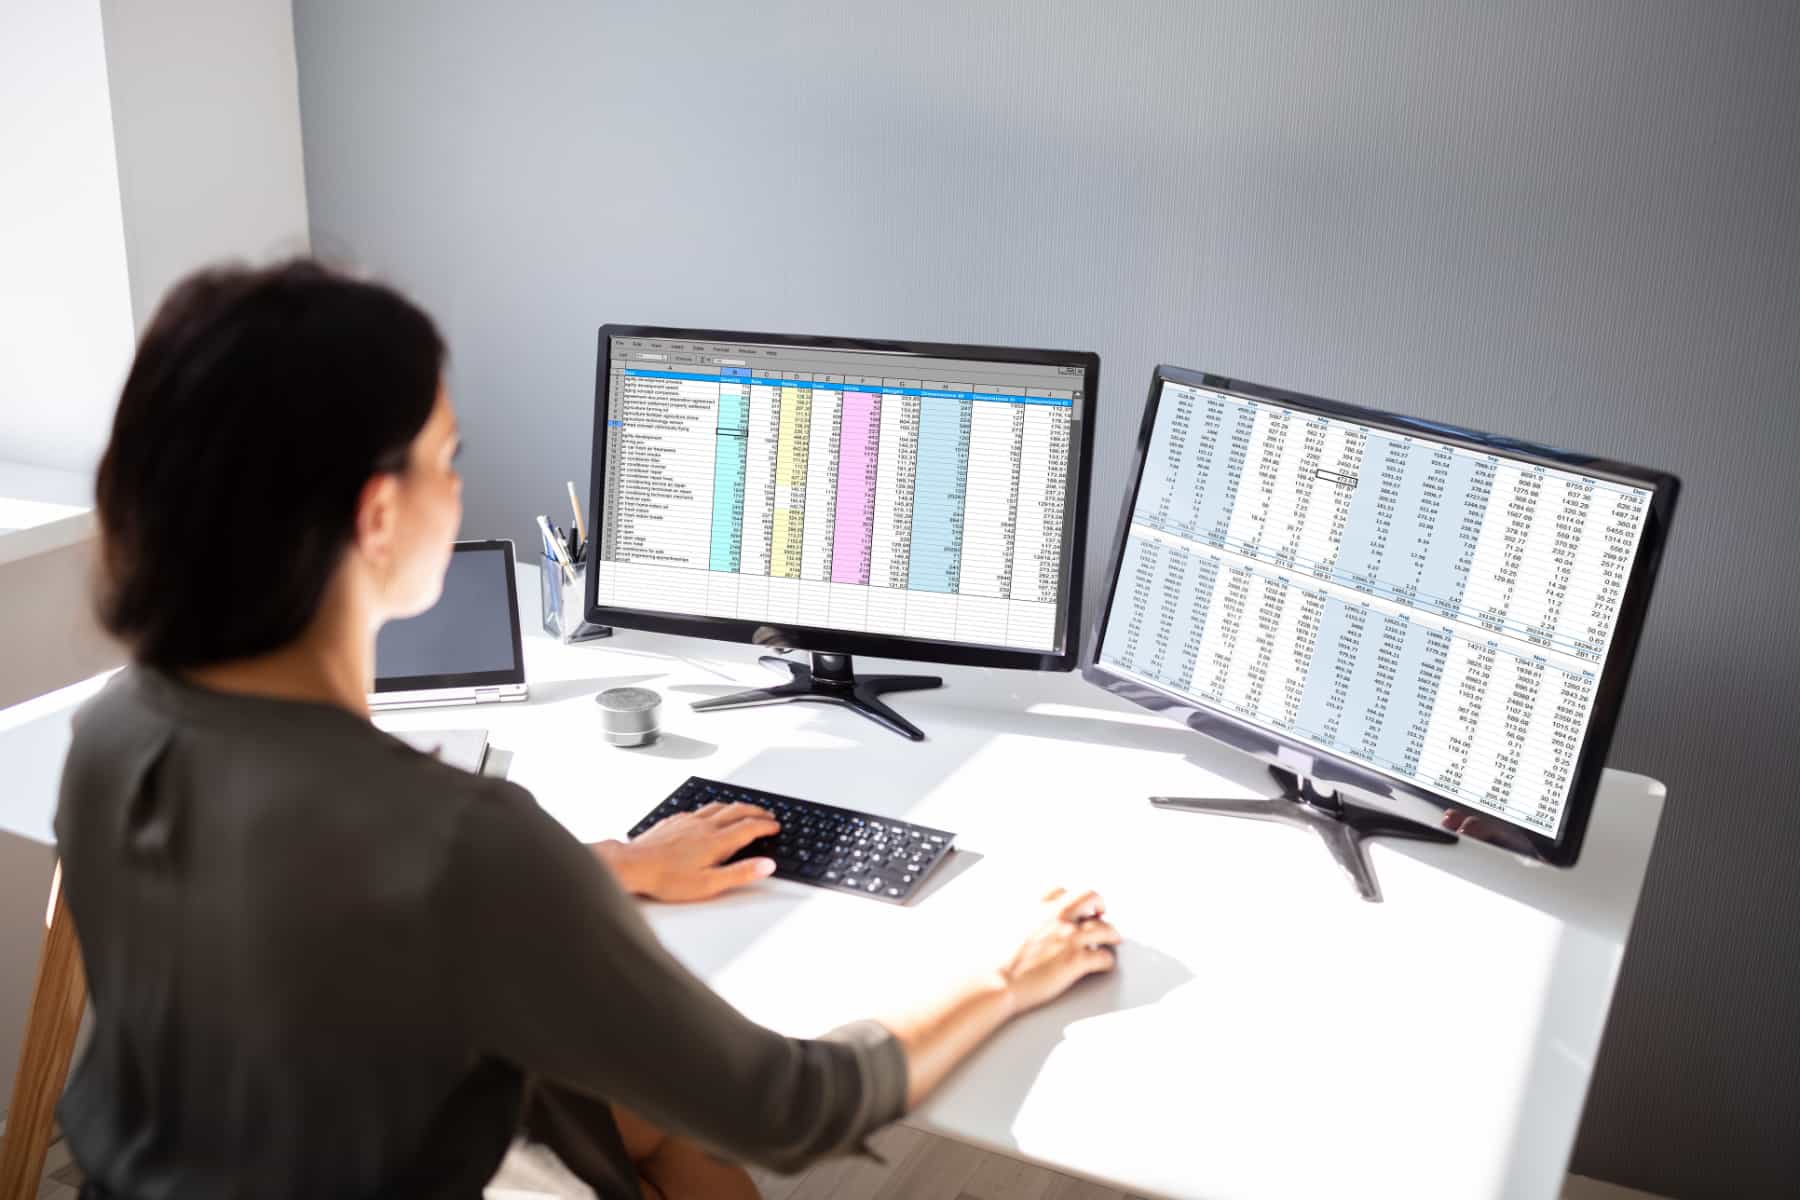 Image of a woman looking at spreadsheets on two desktop monitors